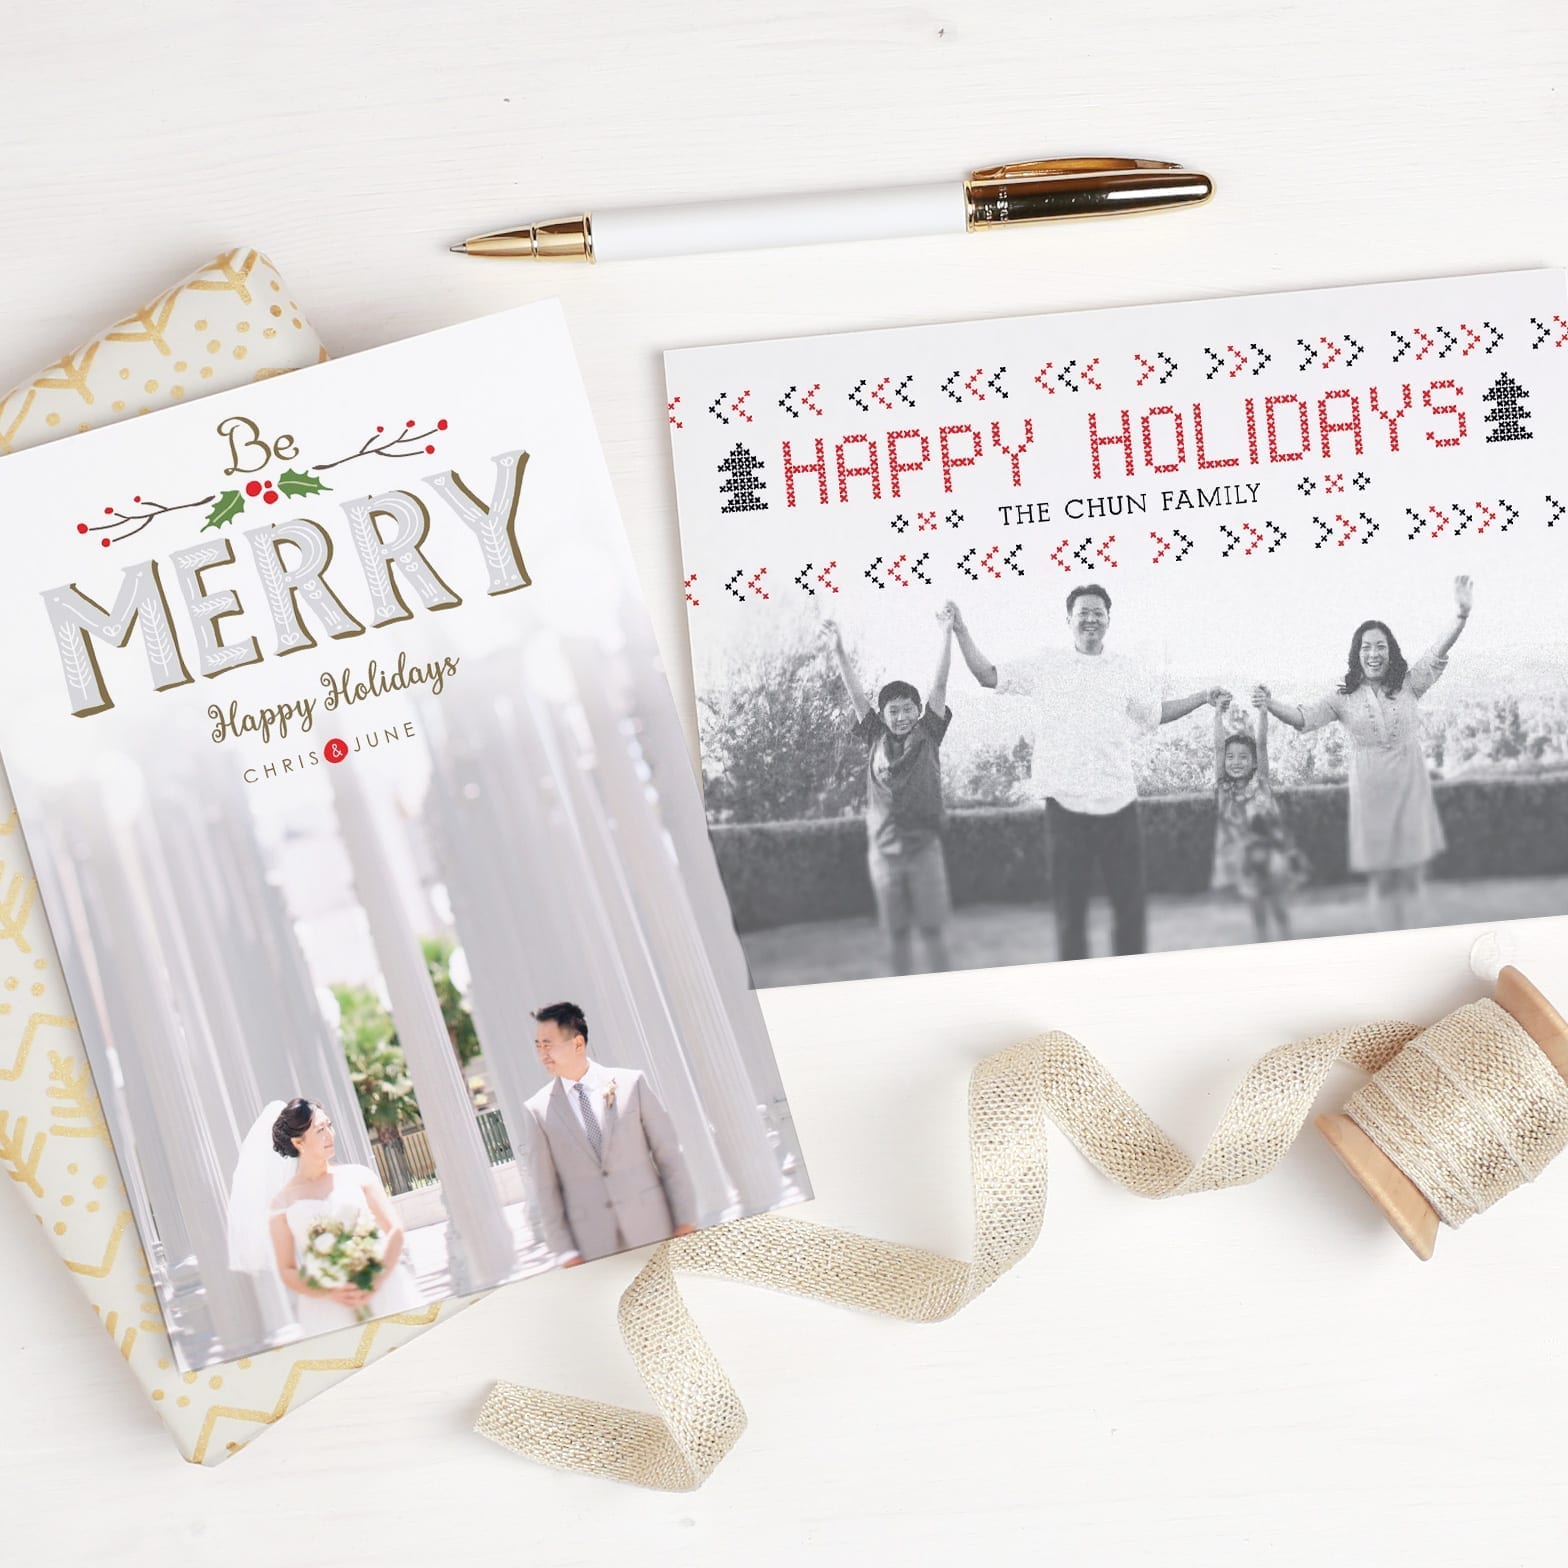 Create your dream invitations, announcements, and Christmas cards with Basic Invite! With over 400 color options, you're sure to make the perfect greeting.